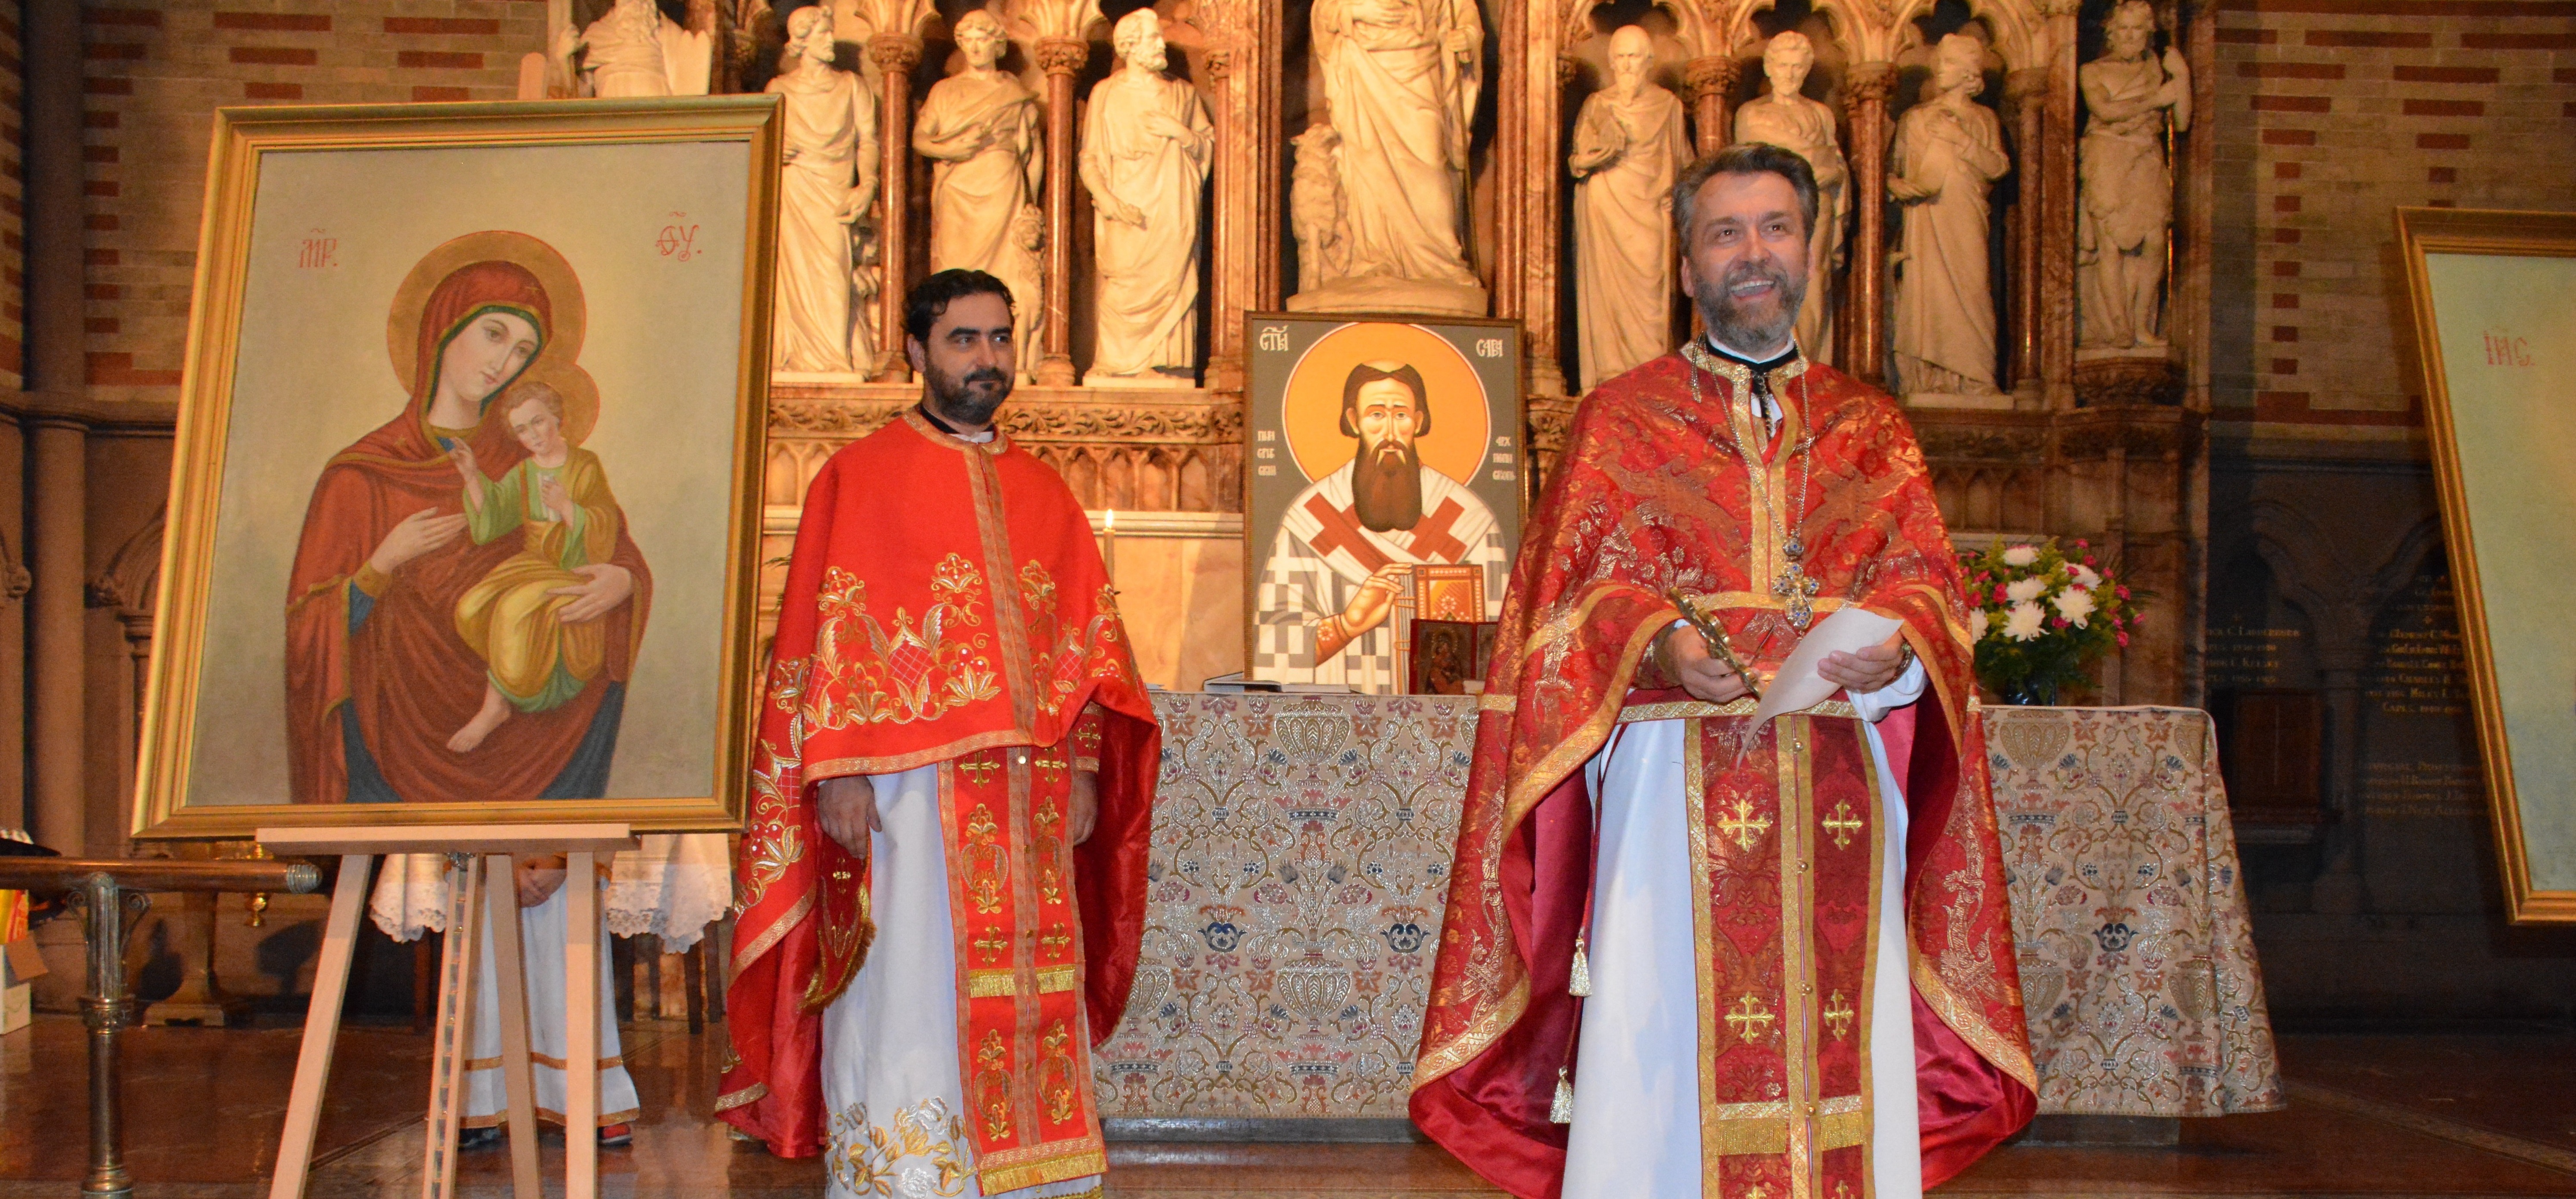 Today’s debut service by our new parish priests, Father Živojin and Father Vladislav – August 21, 2016